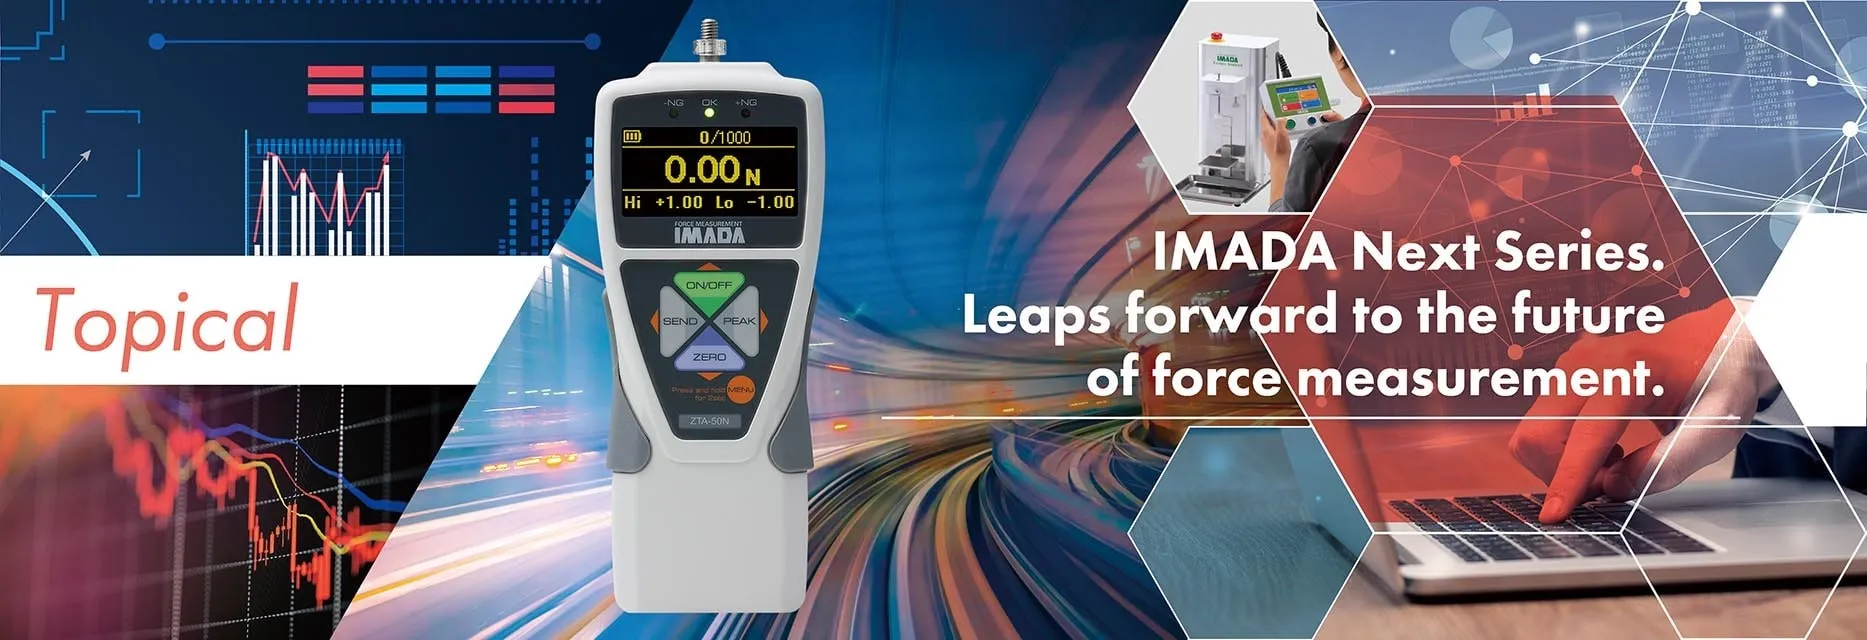 Force Measurement  IMADA specializes in force measurement